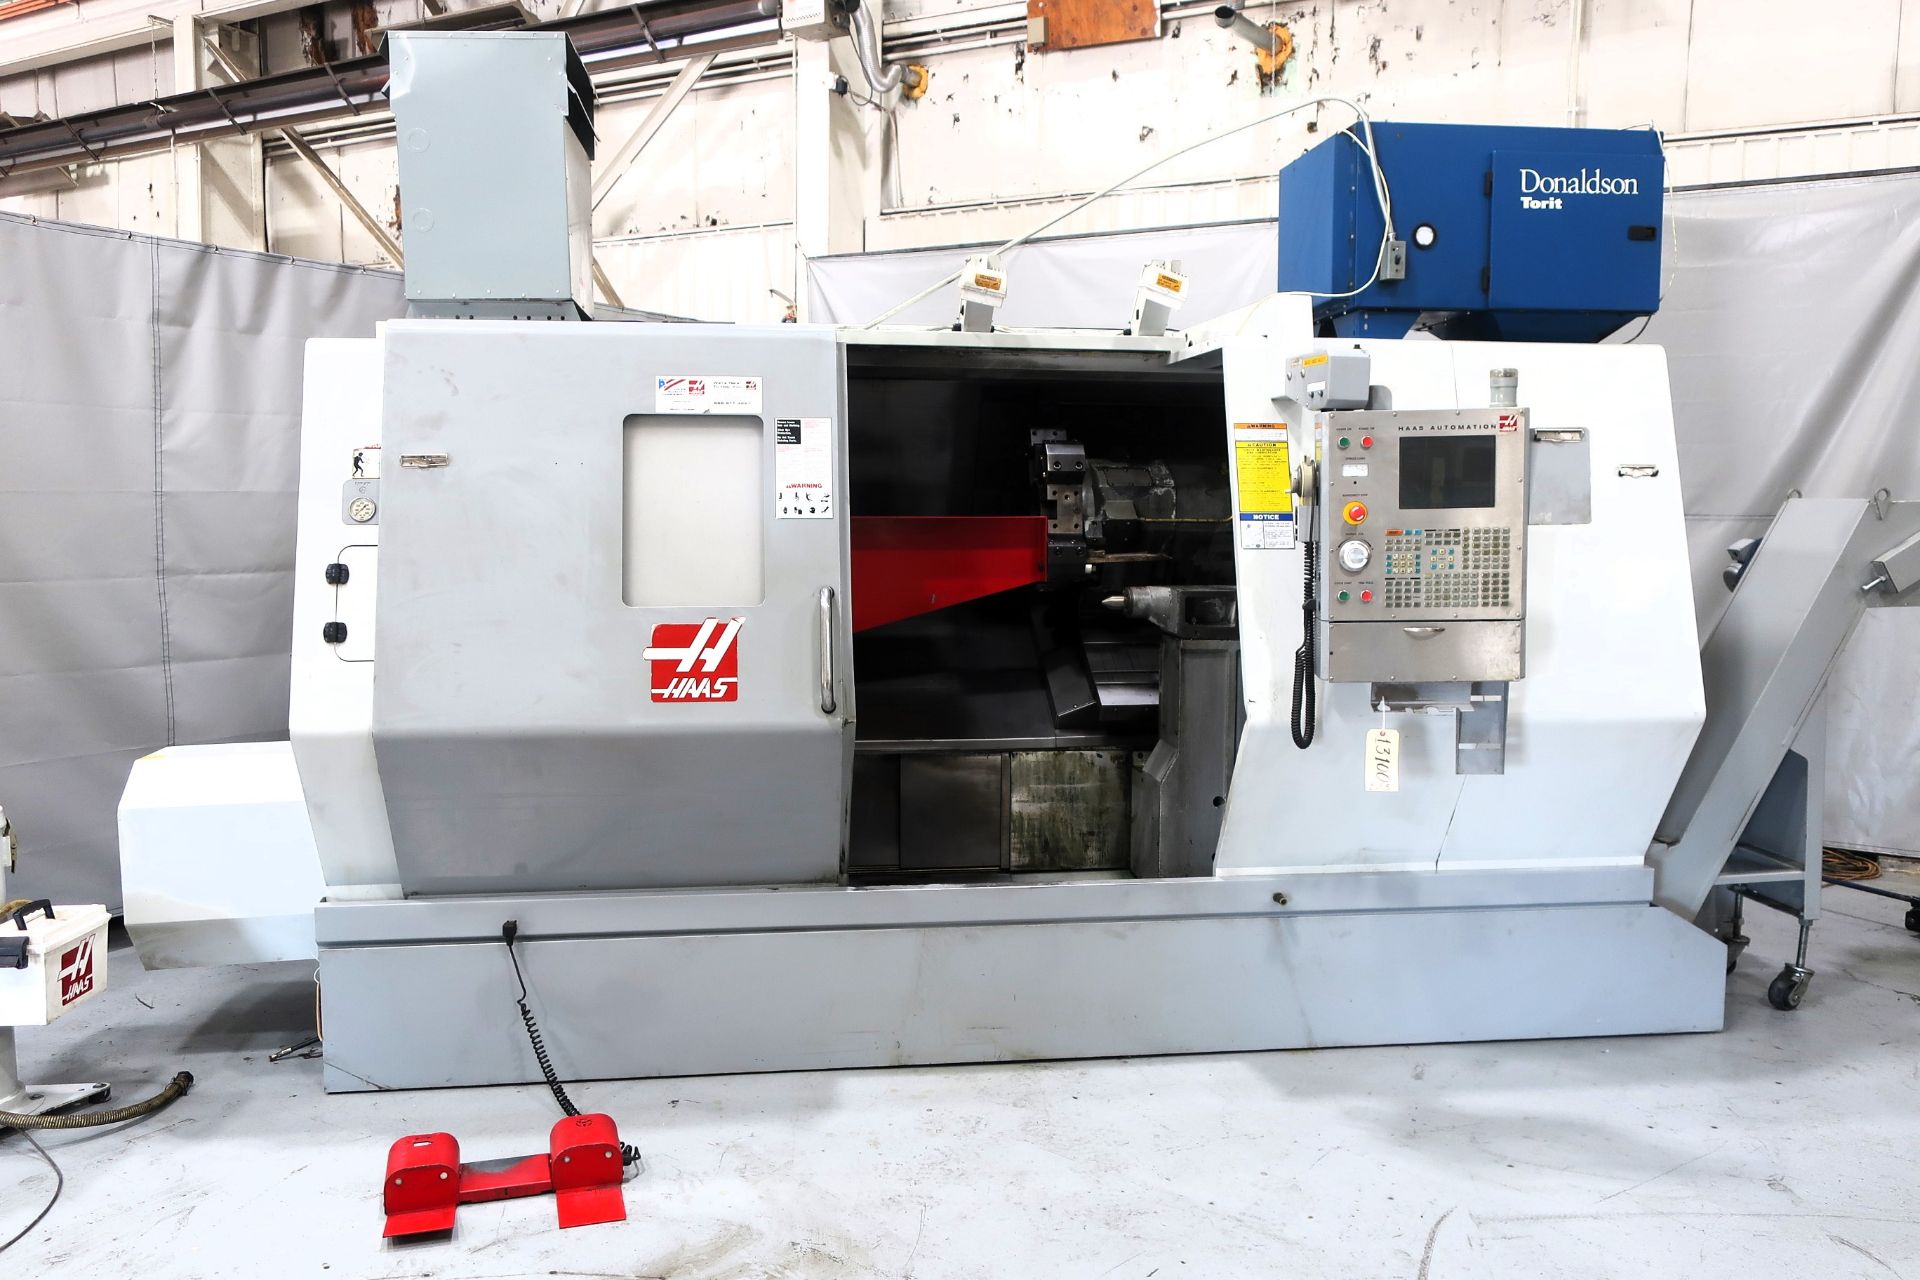 25.5"X40" Haas SL-40T 2-Axis Turning Center Lathe, S/N 73479, 2006